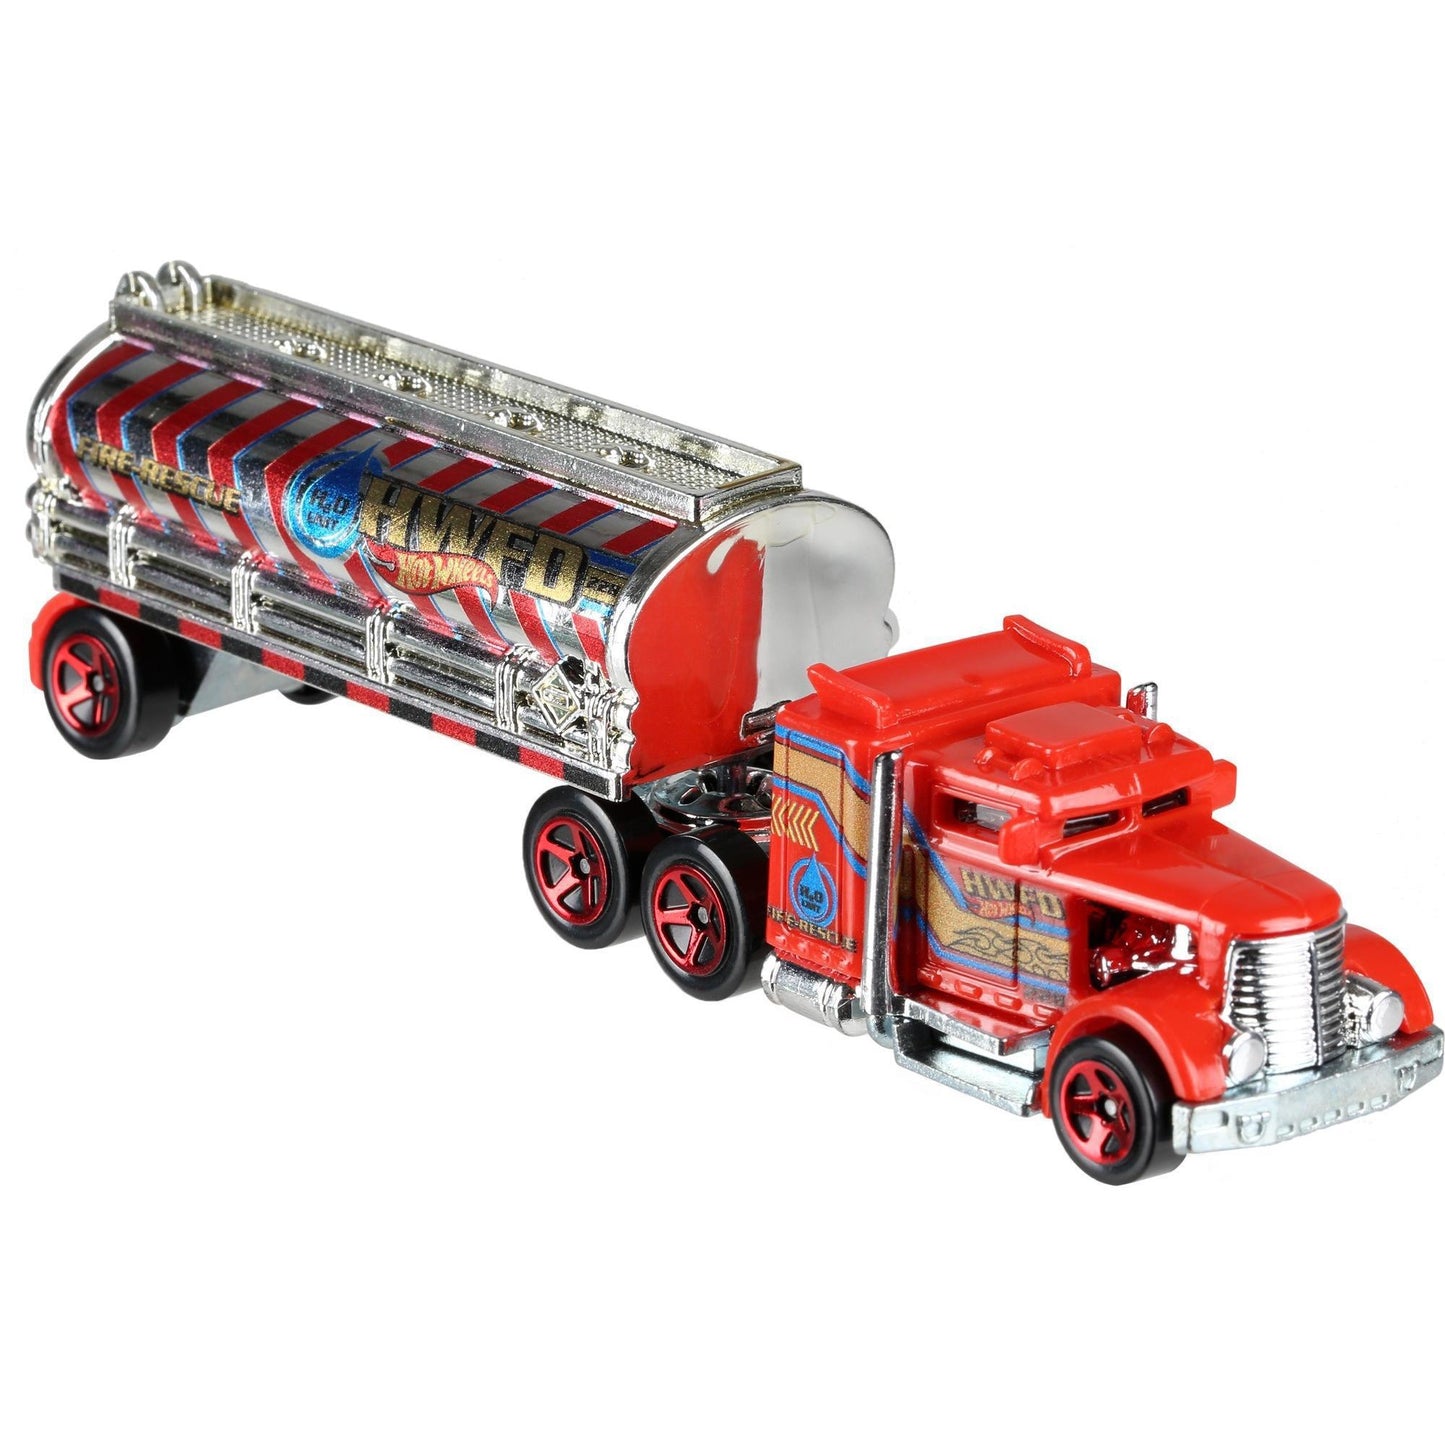 HOT WHEELS Track Trucks Die-Cast Vehicles Cabs and trailers Asst